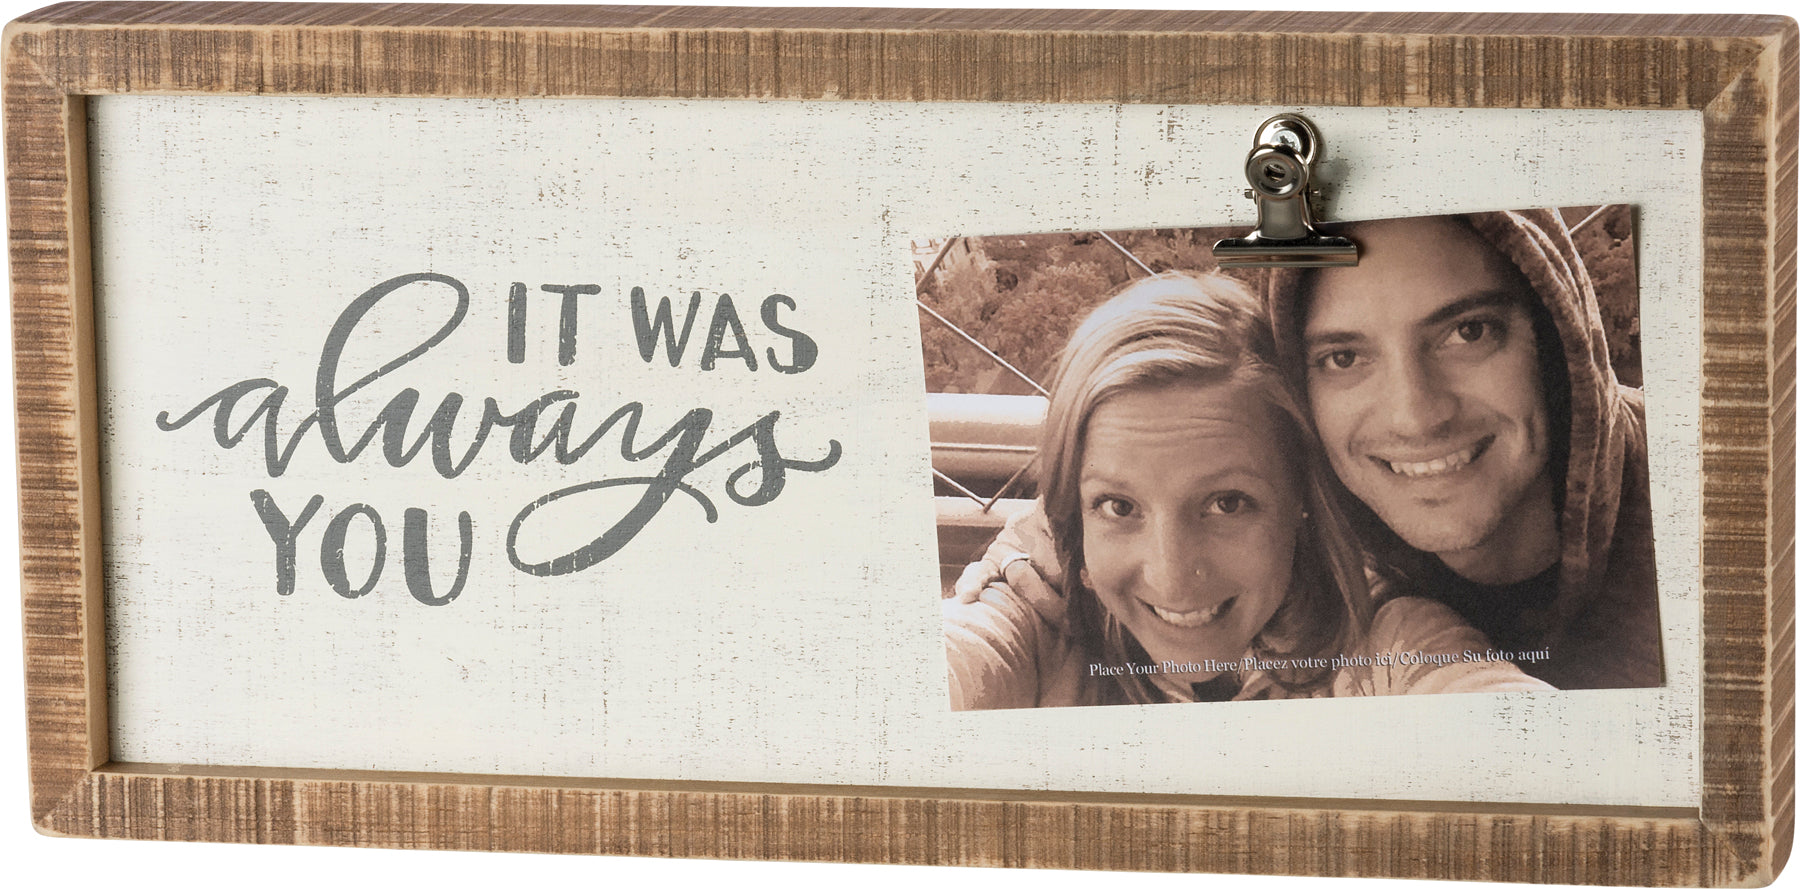 It Was Always You Frame